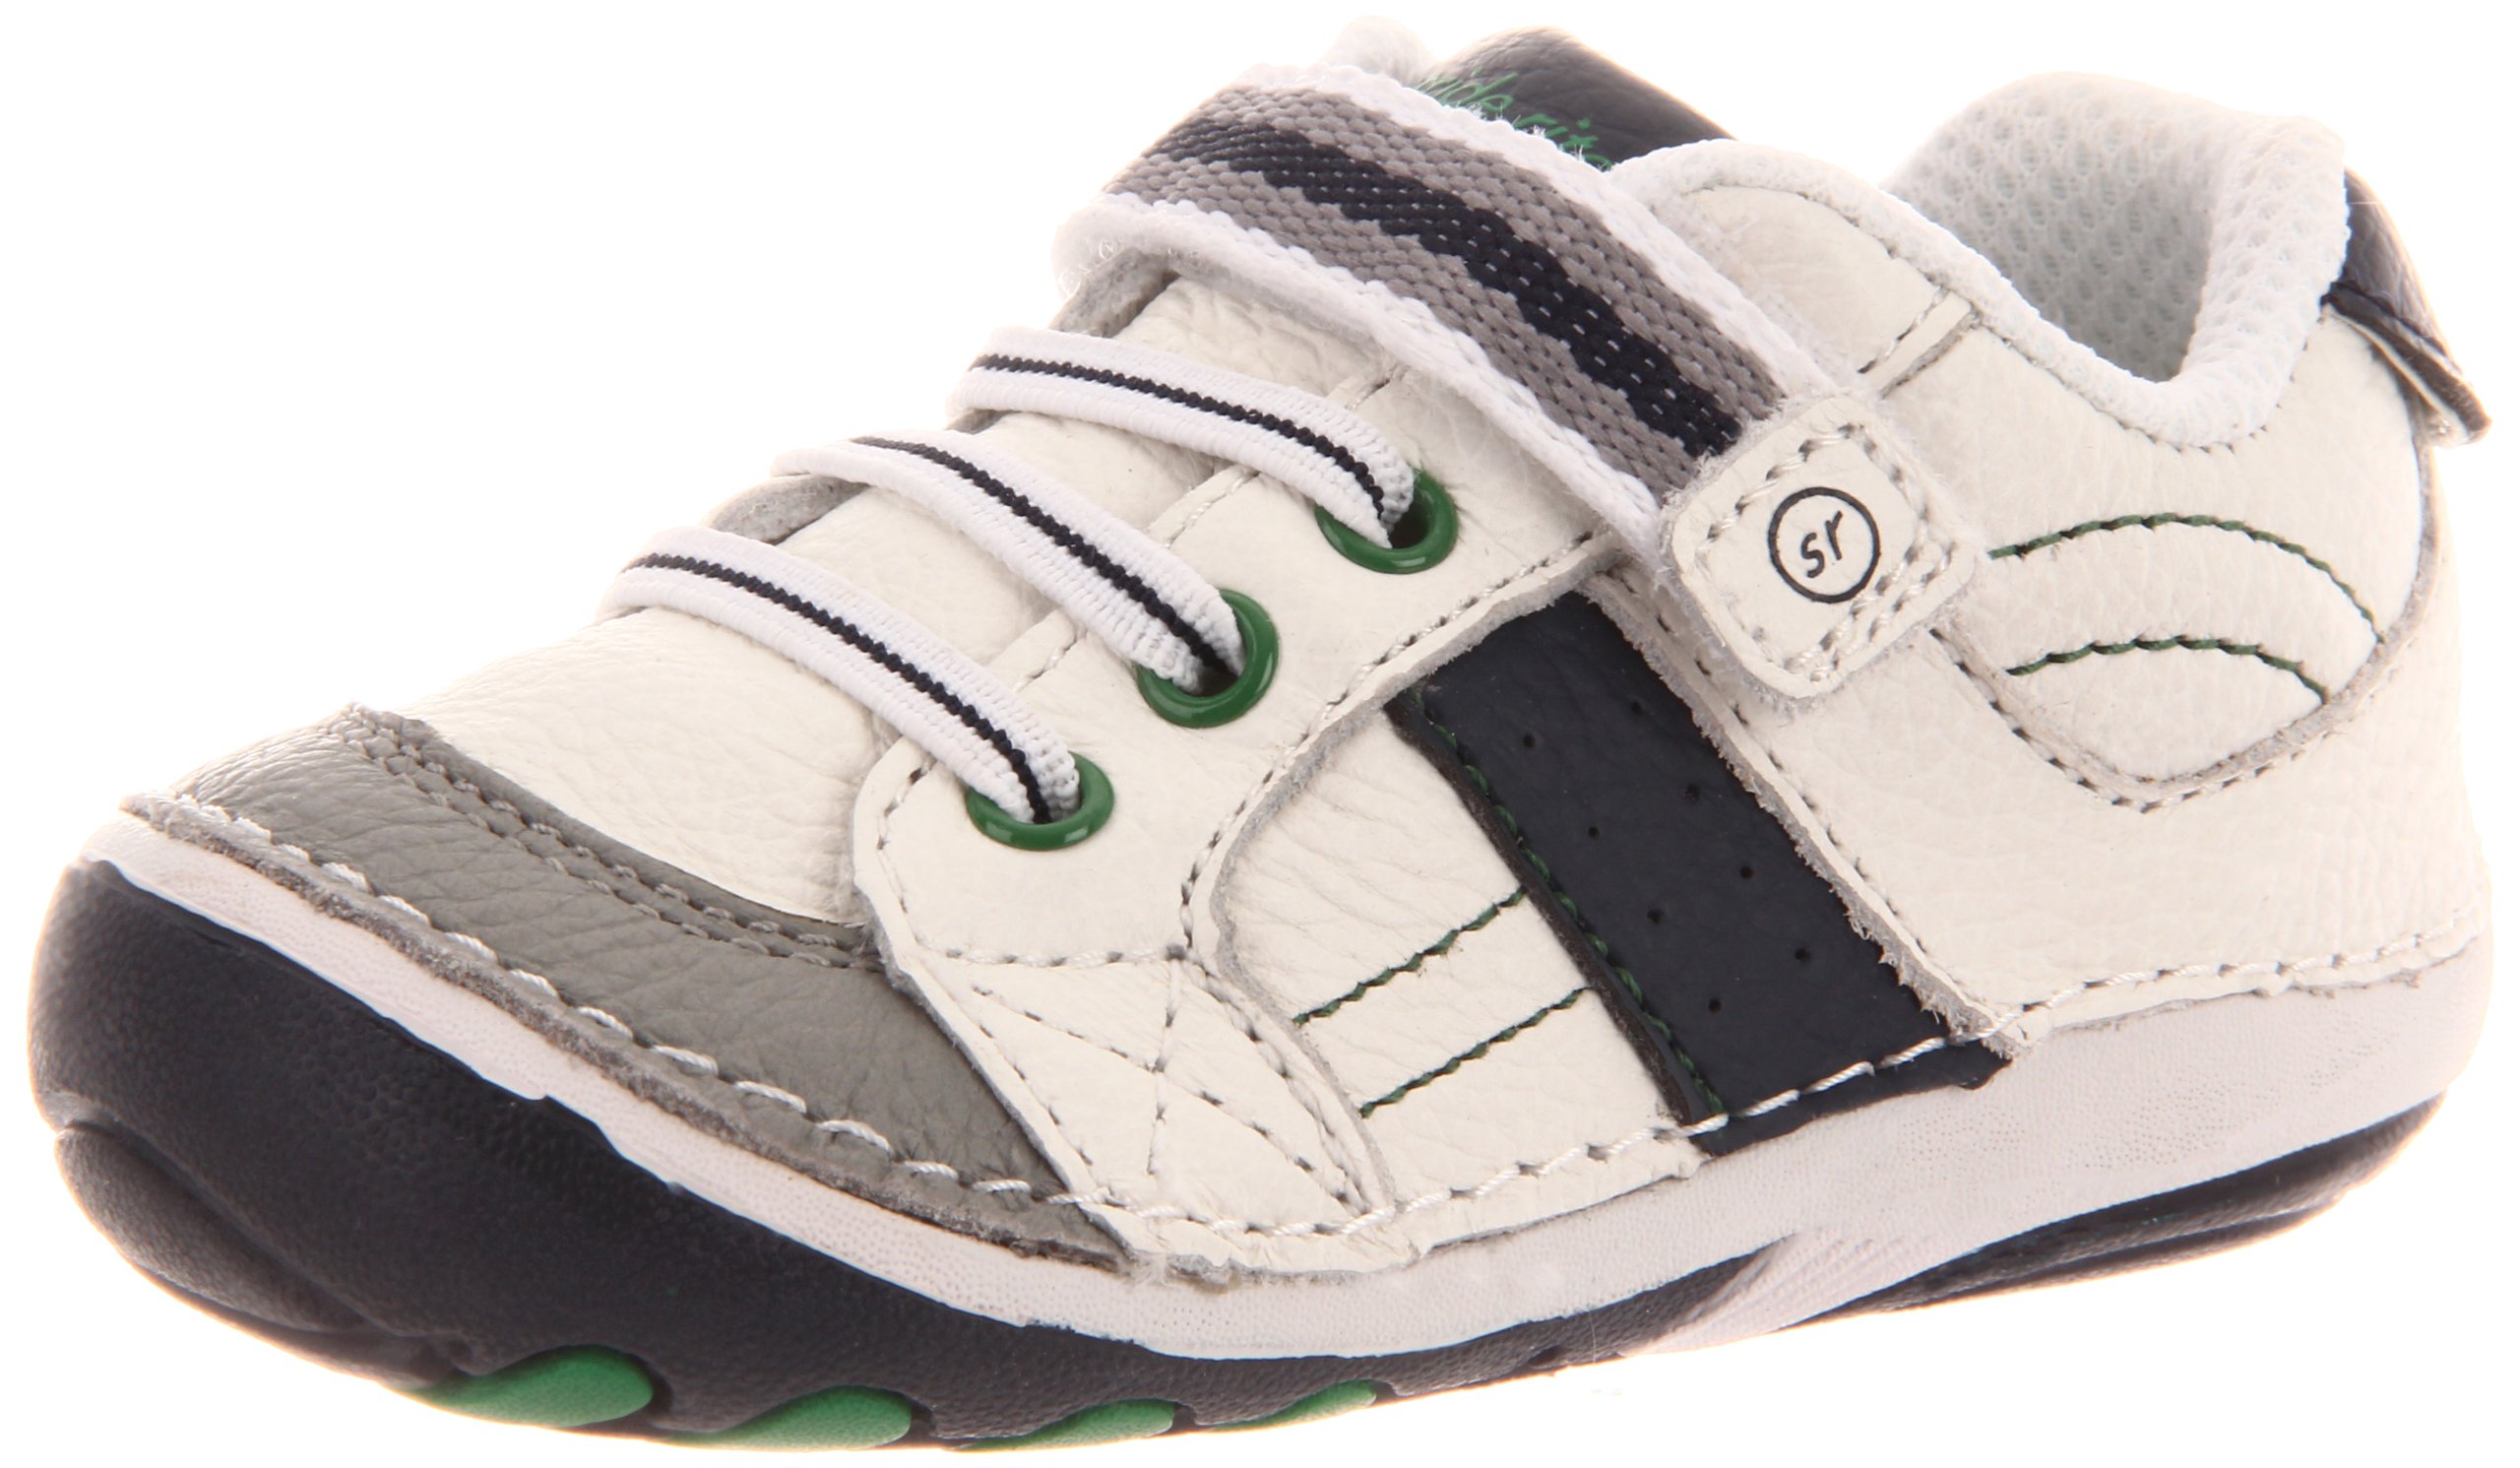 Stride Rite Soft Motion Baby and Toddler Boys Artie Athletic Sneaker